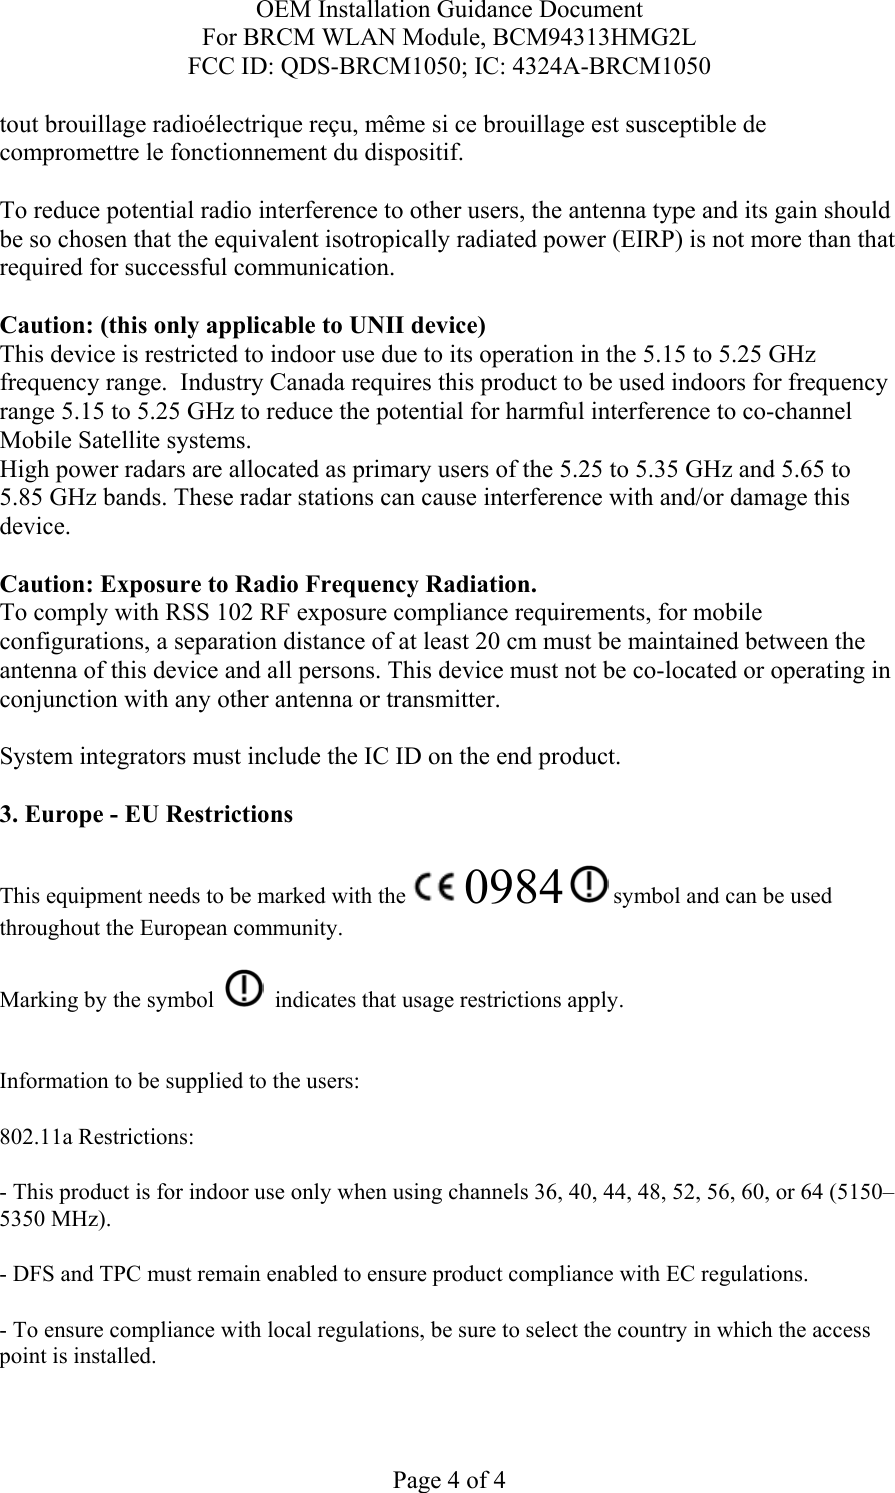 OEM Installation Guidance Document For BRCM WLAN Module, BCM94313HMG2L FCC ID: QDS-BRCM1050; IC: 4324A-BRCM1050  Page 4 of 4 tout brouillage radioélectrique reçu, même si ce brouillage est susceptible de compromettre le fonctionnement du dispositif.  To reduce potential radio interference to other users, the antenna type and its gain should be so chosen that the equivalent isotropically radiated power (EIRP) is not more than that required for successful communication.  Caution: (this only applicable to UNII device) This device is restricted to indoor use due to its operation in the 5.15 to 5.25 GHz frequency range.  Industry Canada requires this product to be used indoors for frequency range 5.15 to 5.25 GHz to reduce the potential for harmful interference to co-channel Mobile Satellite systems. High power radars are allocated as primary users of the 5.25 to 5.35 GHz and 5.65 to 5.85 GHz bands. These radar stations can cause interference with and/or damage this device.  Caution: Exposure to Radio Frequency Radiation. To comply with RSS 102 RF exposure compliance requirements, for mobile configurations, a separation distance of at least 20 cm must be maintained between the antenna of this device and all persons. This device must not be co-located or operating in conjunction with any other antenna or transmitter.  System integrators must include the IC ID on the end product.   3. Europe - EU Restrictions This equipment needs to be marked with the   0984  symbol and can be used throughout the European community.  Marking by the symbol     indicates that usage restrictions apply.  Information to be supplied to the users: 802.11a Restrictions: - This product is for indoor use only when using channels 36, 40, 44, 48, 52, 56, 60, or 64 (5150–5350 MHz).       - DFS and TPC must remain enabled to ensure product compliance with EC regulations.      - To ensure compliance with local regulations, be sure to select the country in which the access point is installed. 